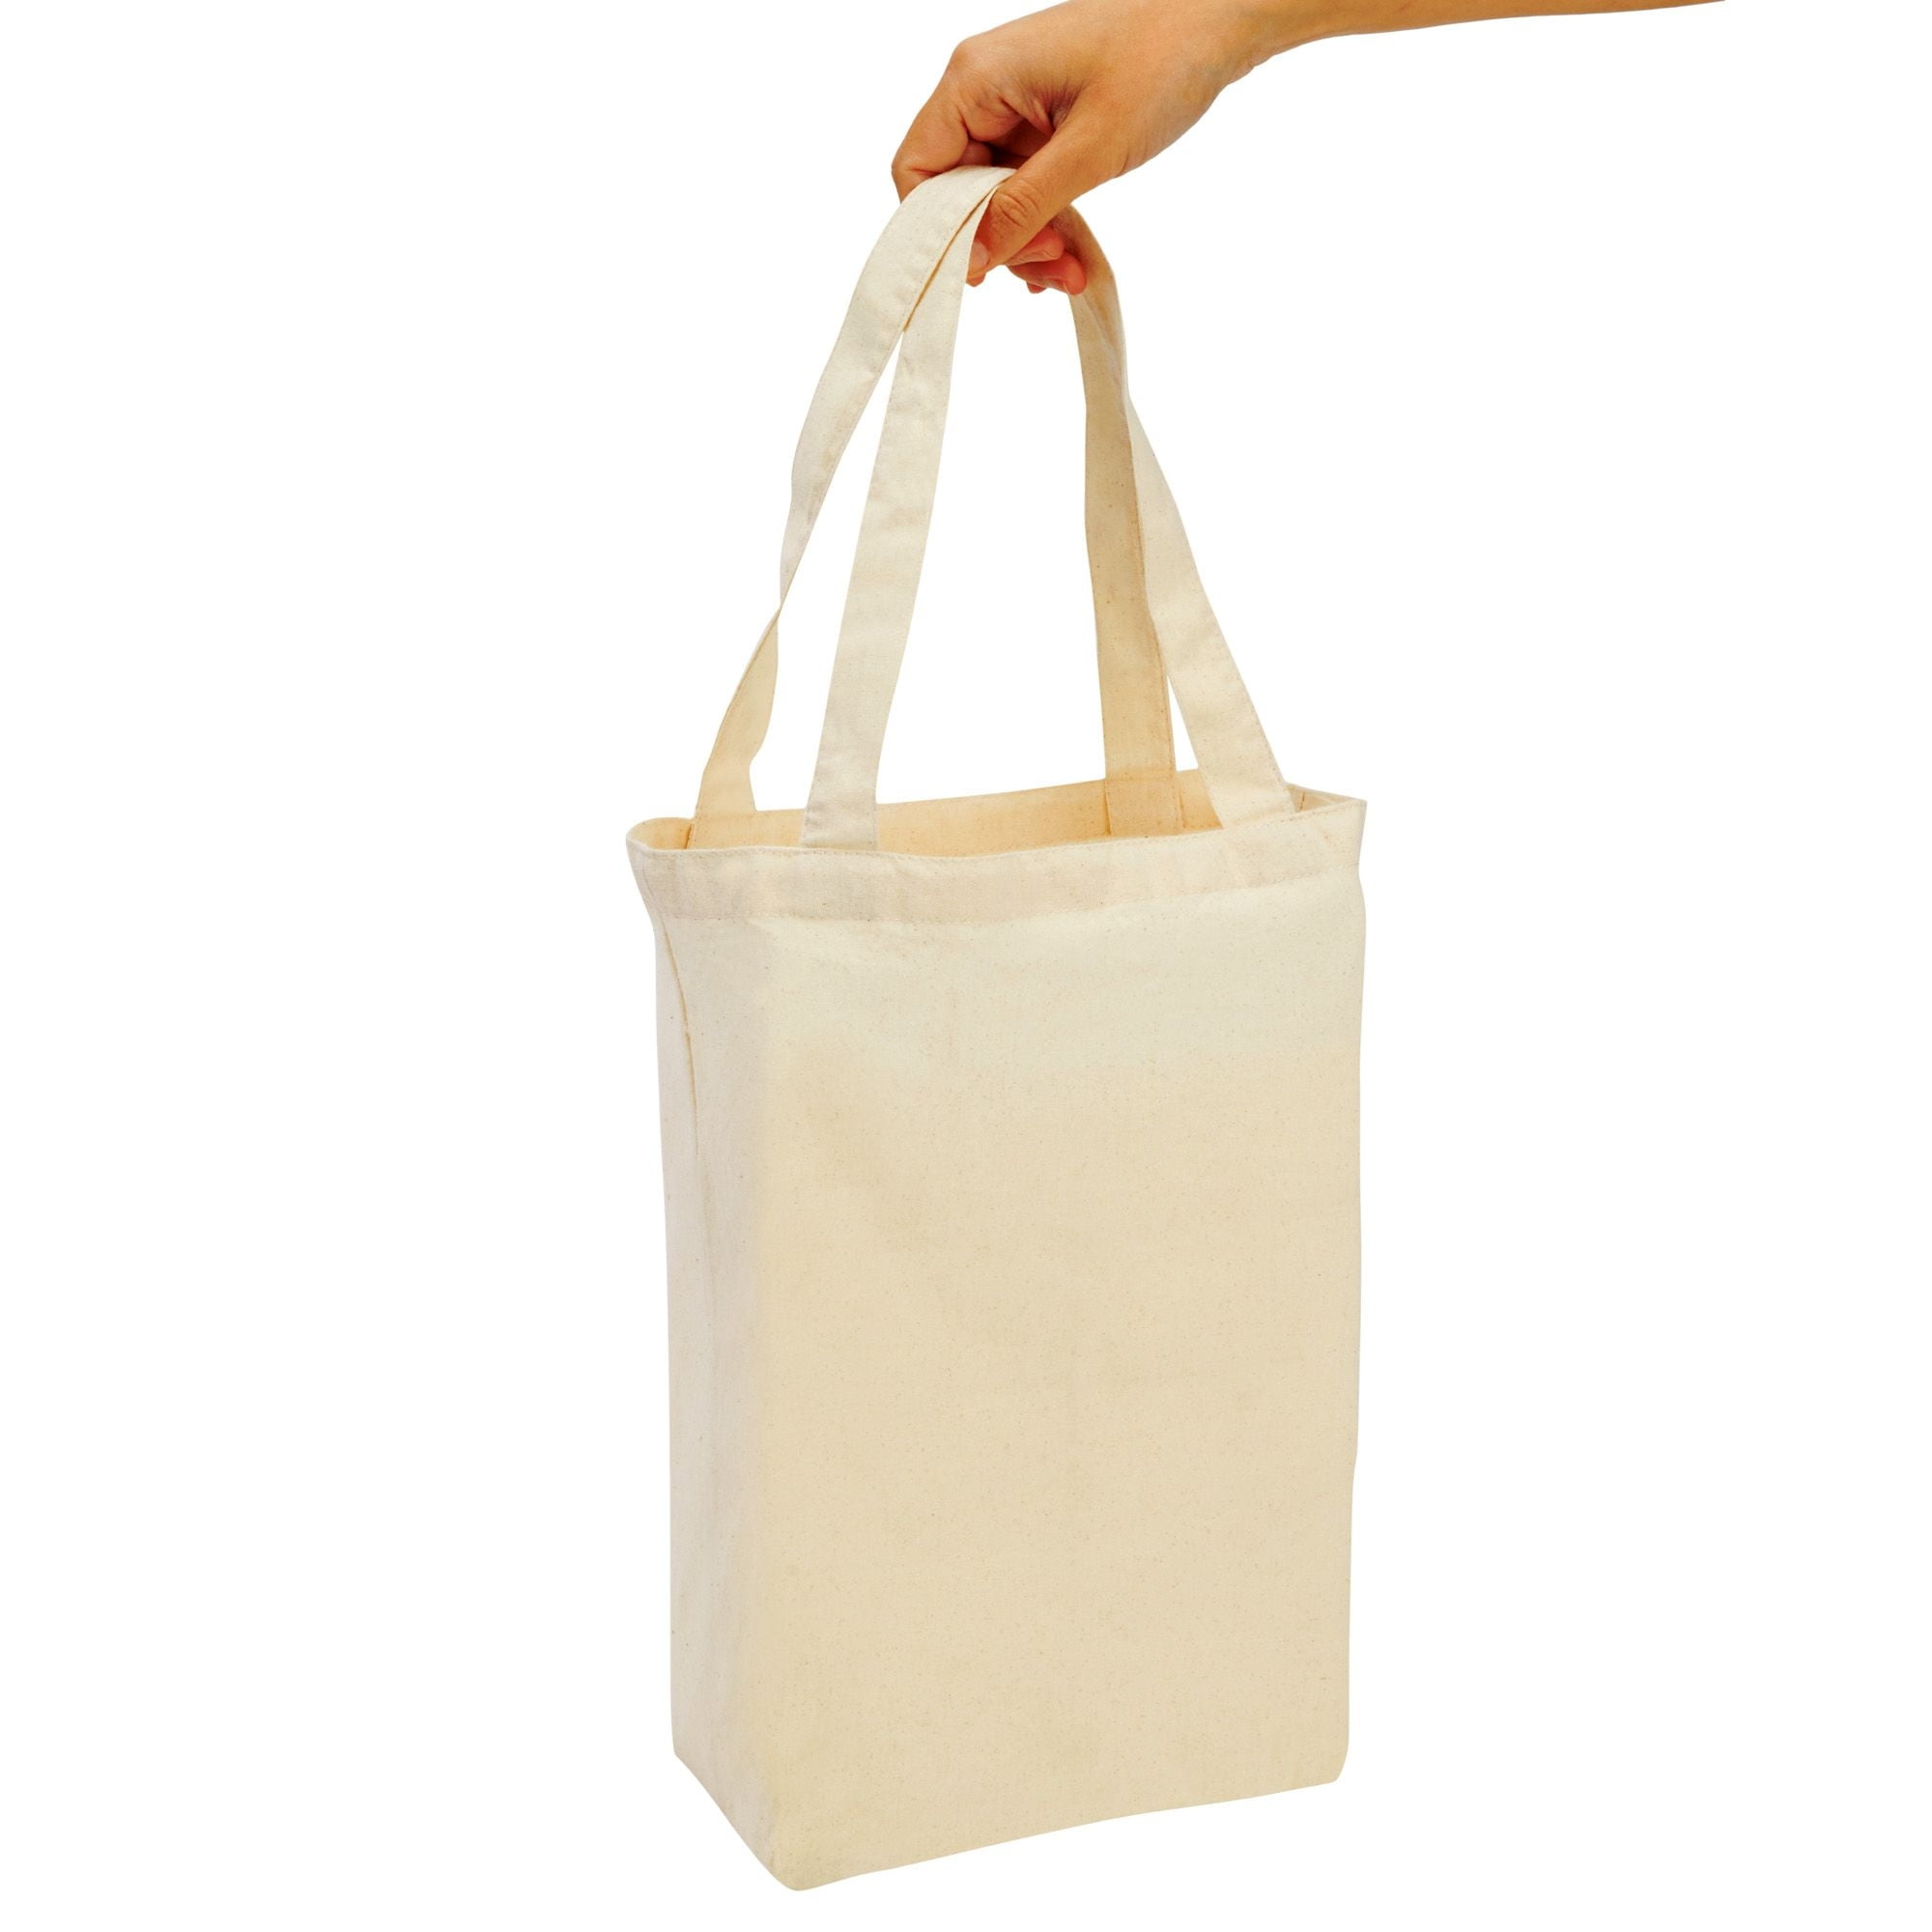 Resuable Blank Tote Bags for DIY, Art & Crafts, Decorations Set of 24  (Gold) 